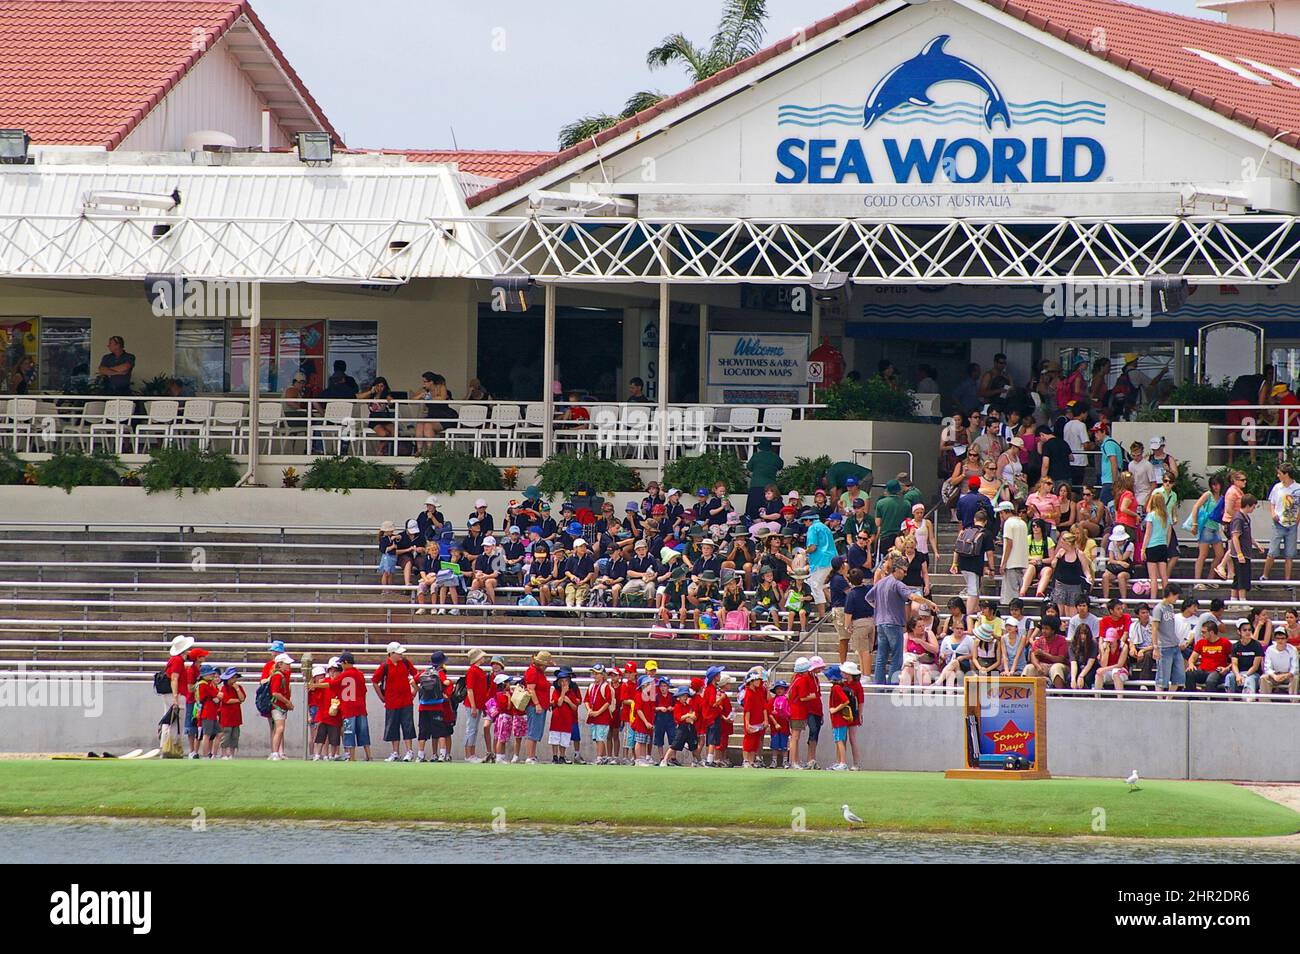 Entrance to Sea World, 2005. School parties and others waiting to enter Sea World theme park on the Gold Coast, Queensland, Australia. Stock Photo